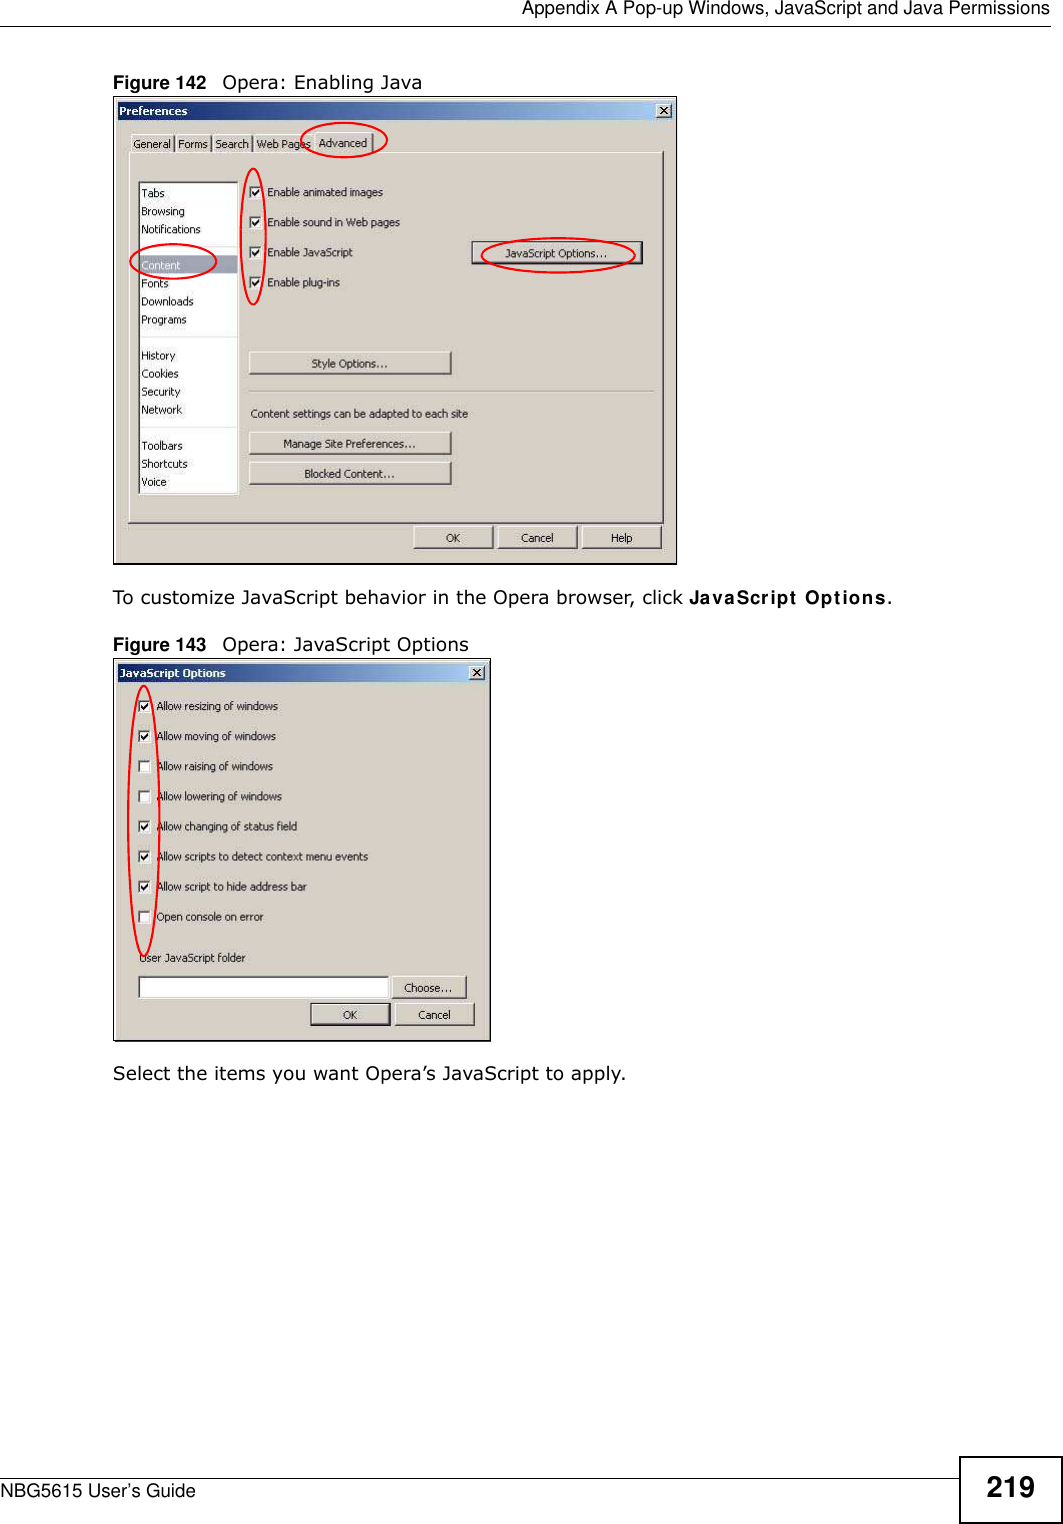  Appendix A Pop-up Windows, JavaScript and Java PermissionsNBG5615 User’s Guide 219Figure 142   Opera: Enabling JavaTo customize JavaScript behavior in the Opera browser, click JavaScript Options. Figure 143   Opera: JavaScript OptionsSelect the items you want Opera’s JavaScript to apply.